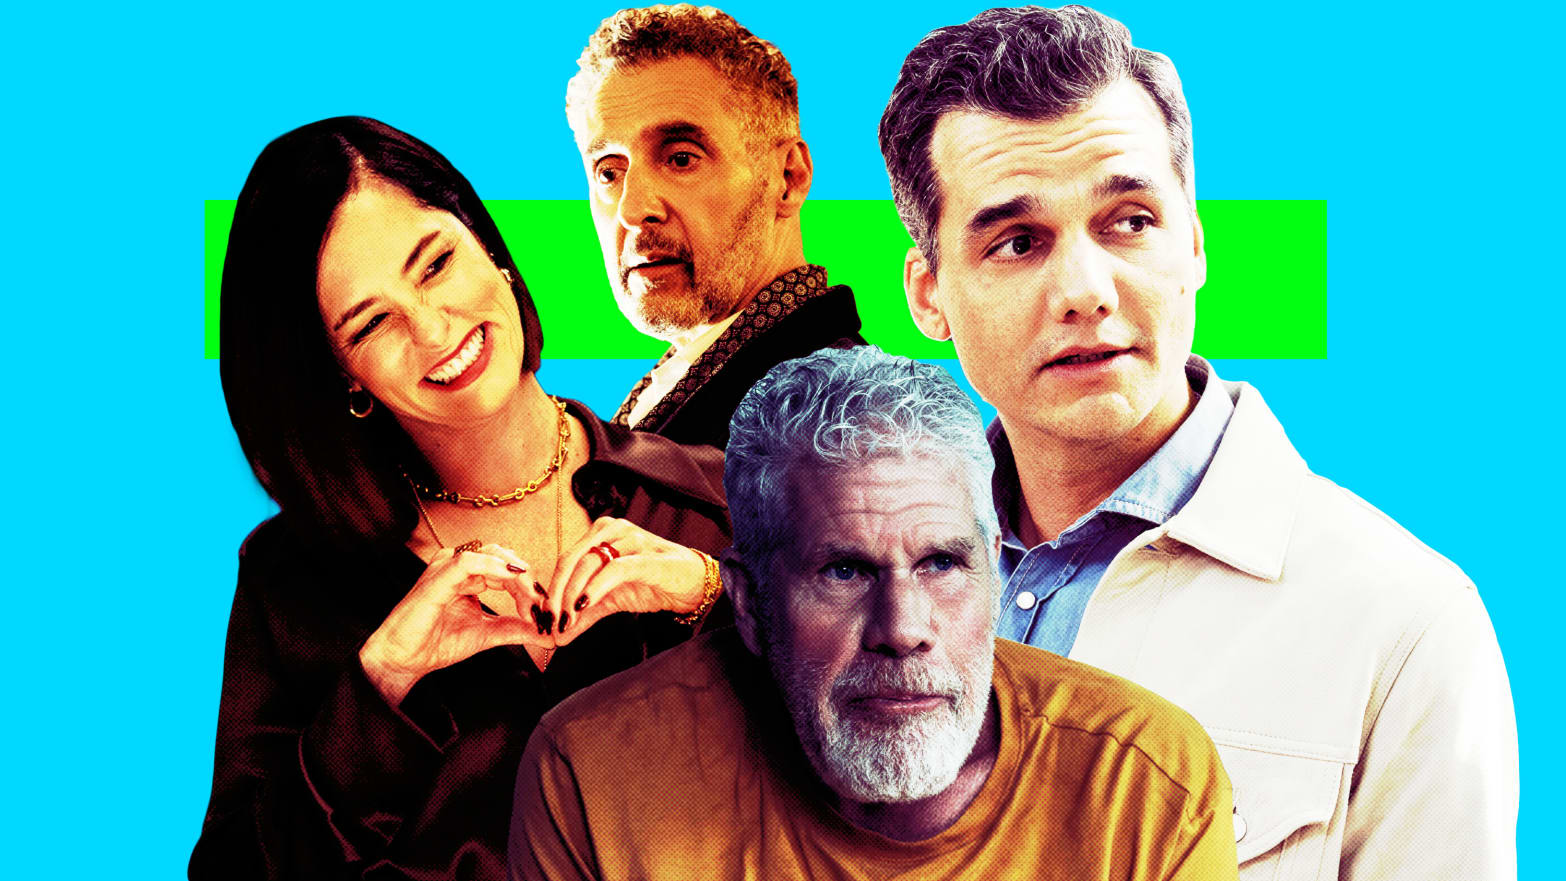 A photo illustration of Parker Posey, John Turturro, Ron Perlman, and Wagner Moura.